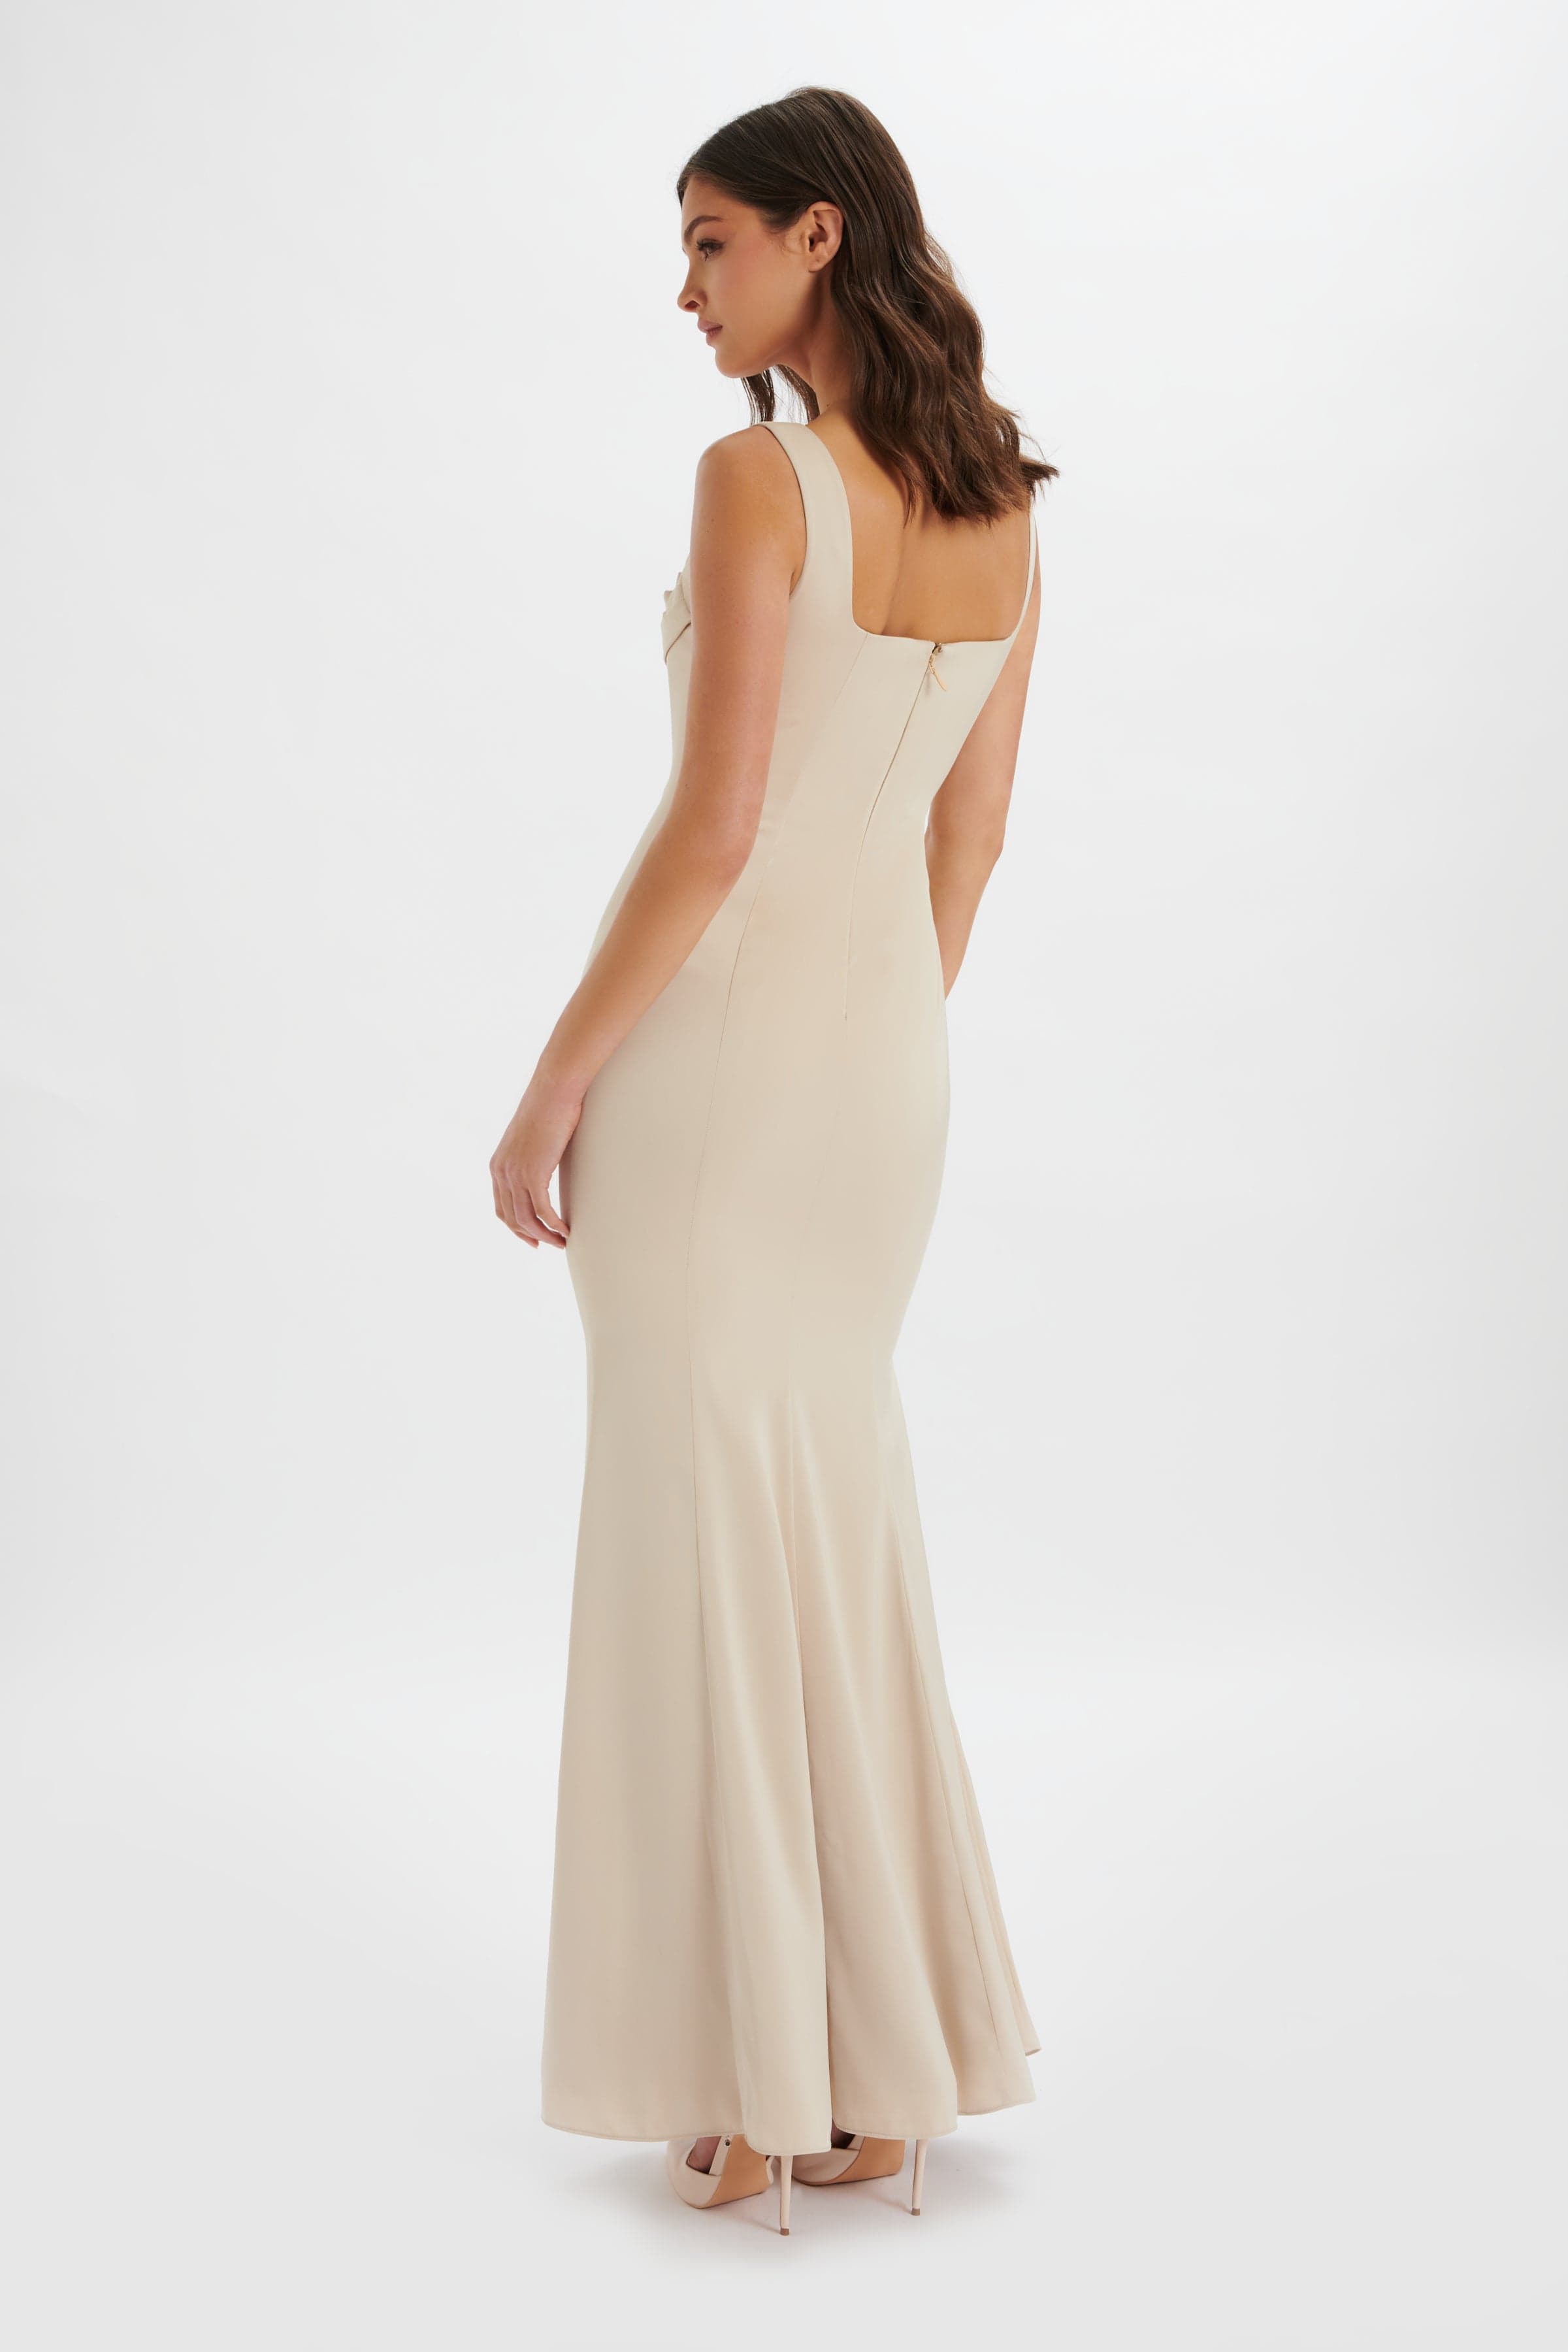 TARA Structured Satin Cowl Front Maxi Dress in Champagne